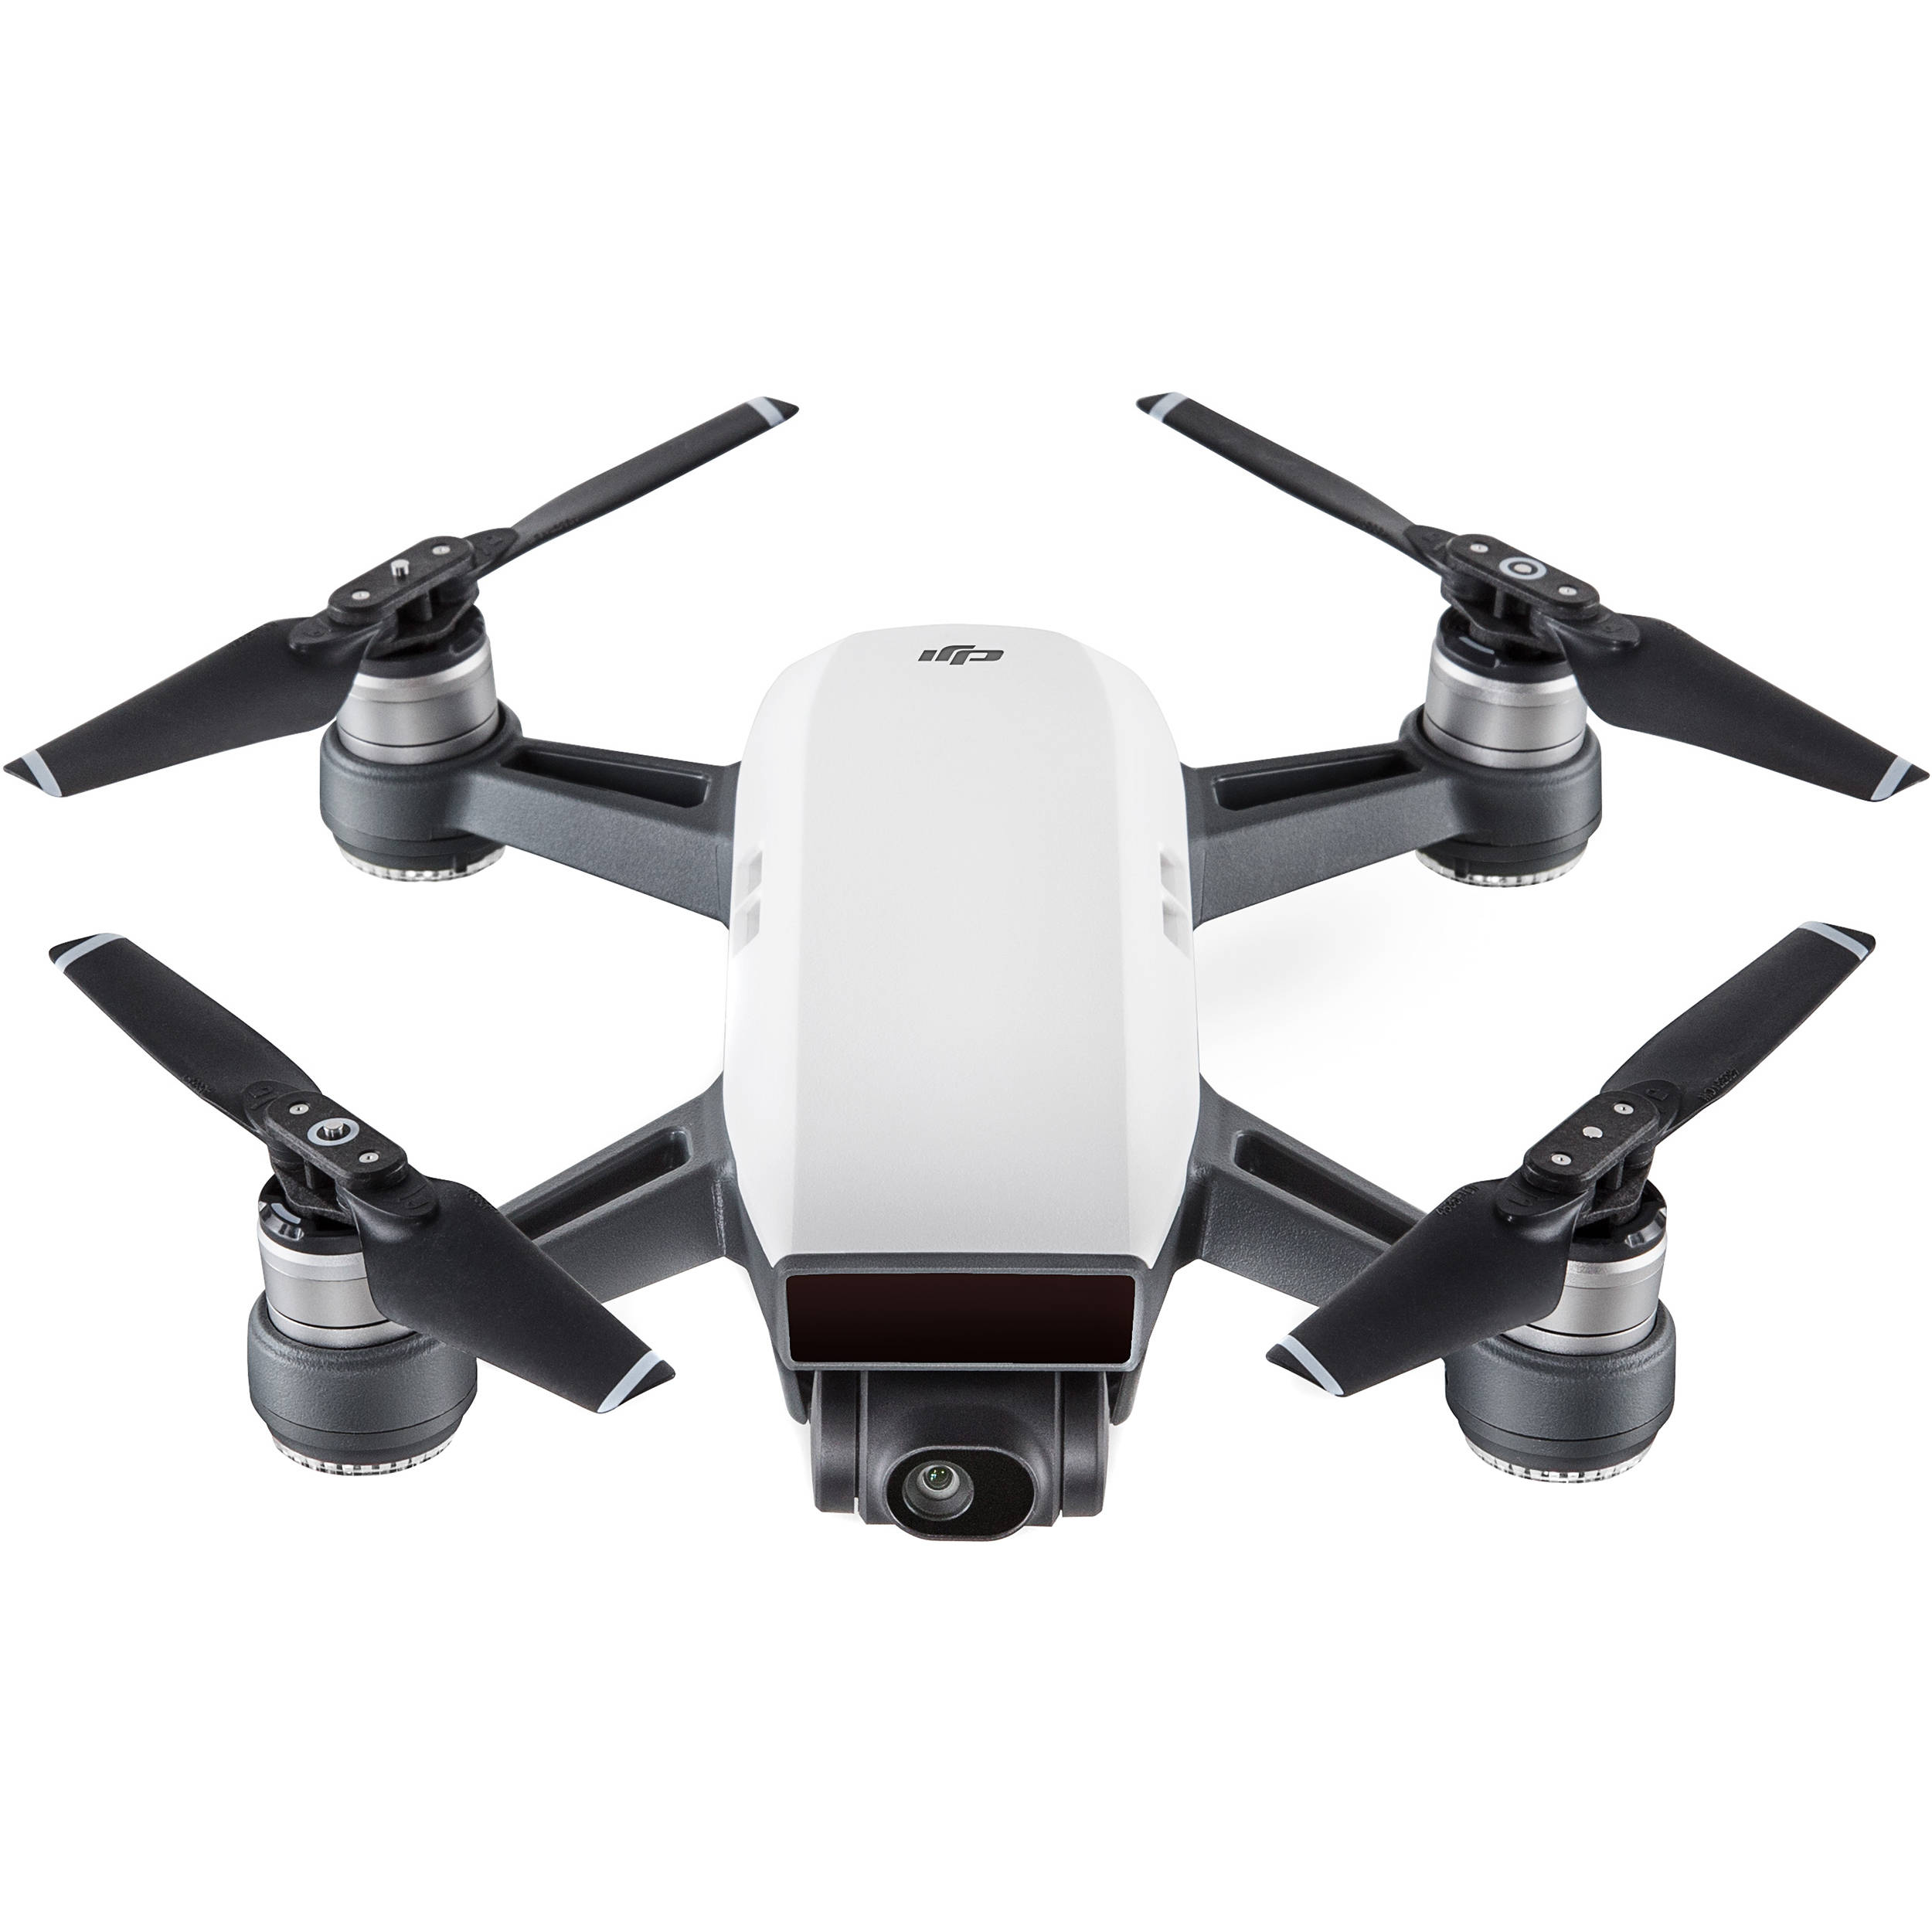 dji spark only drone